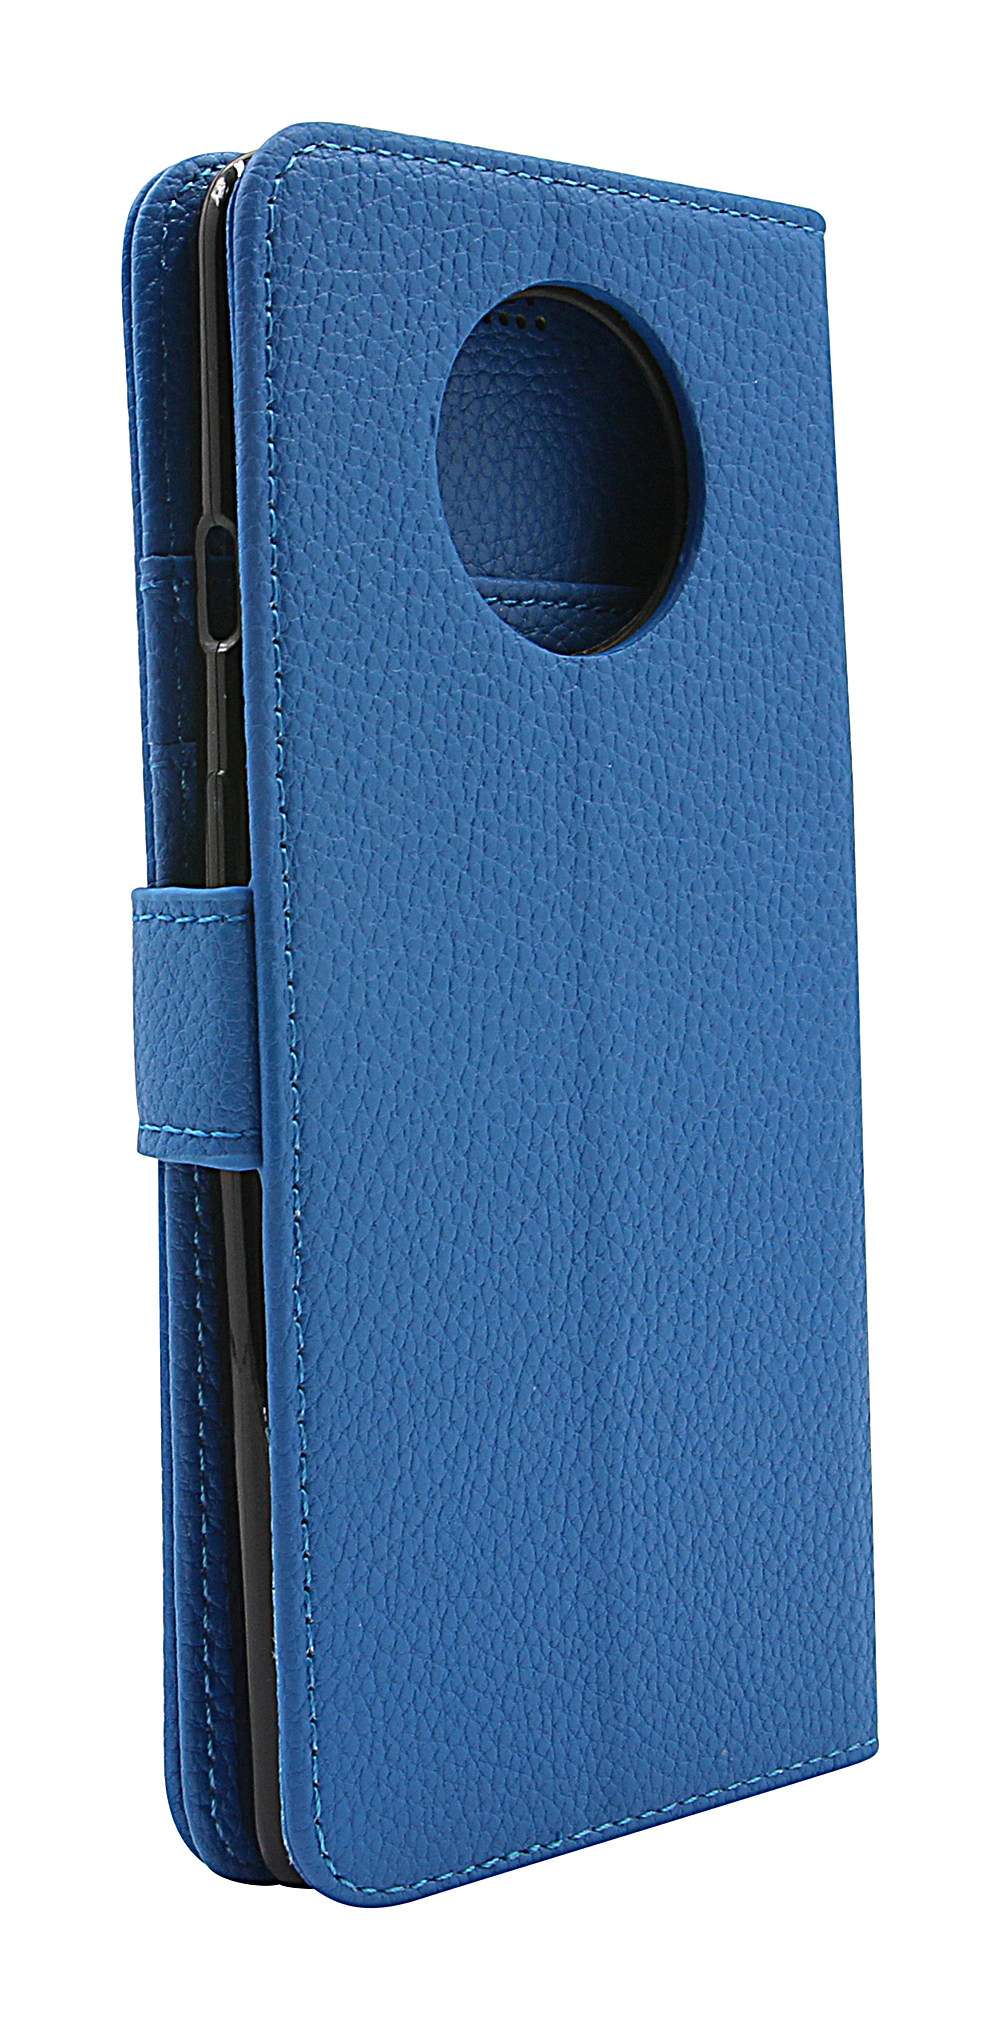 New Standcase Wallet OnePlus 7T